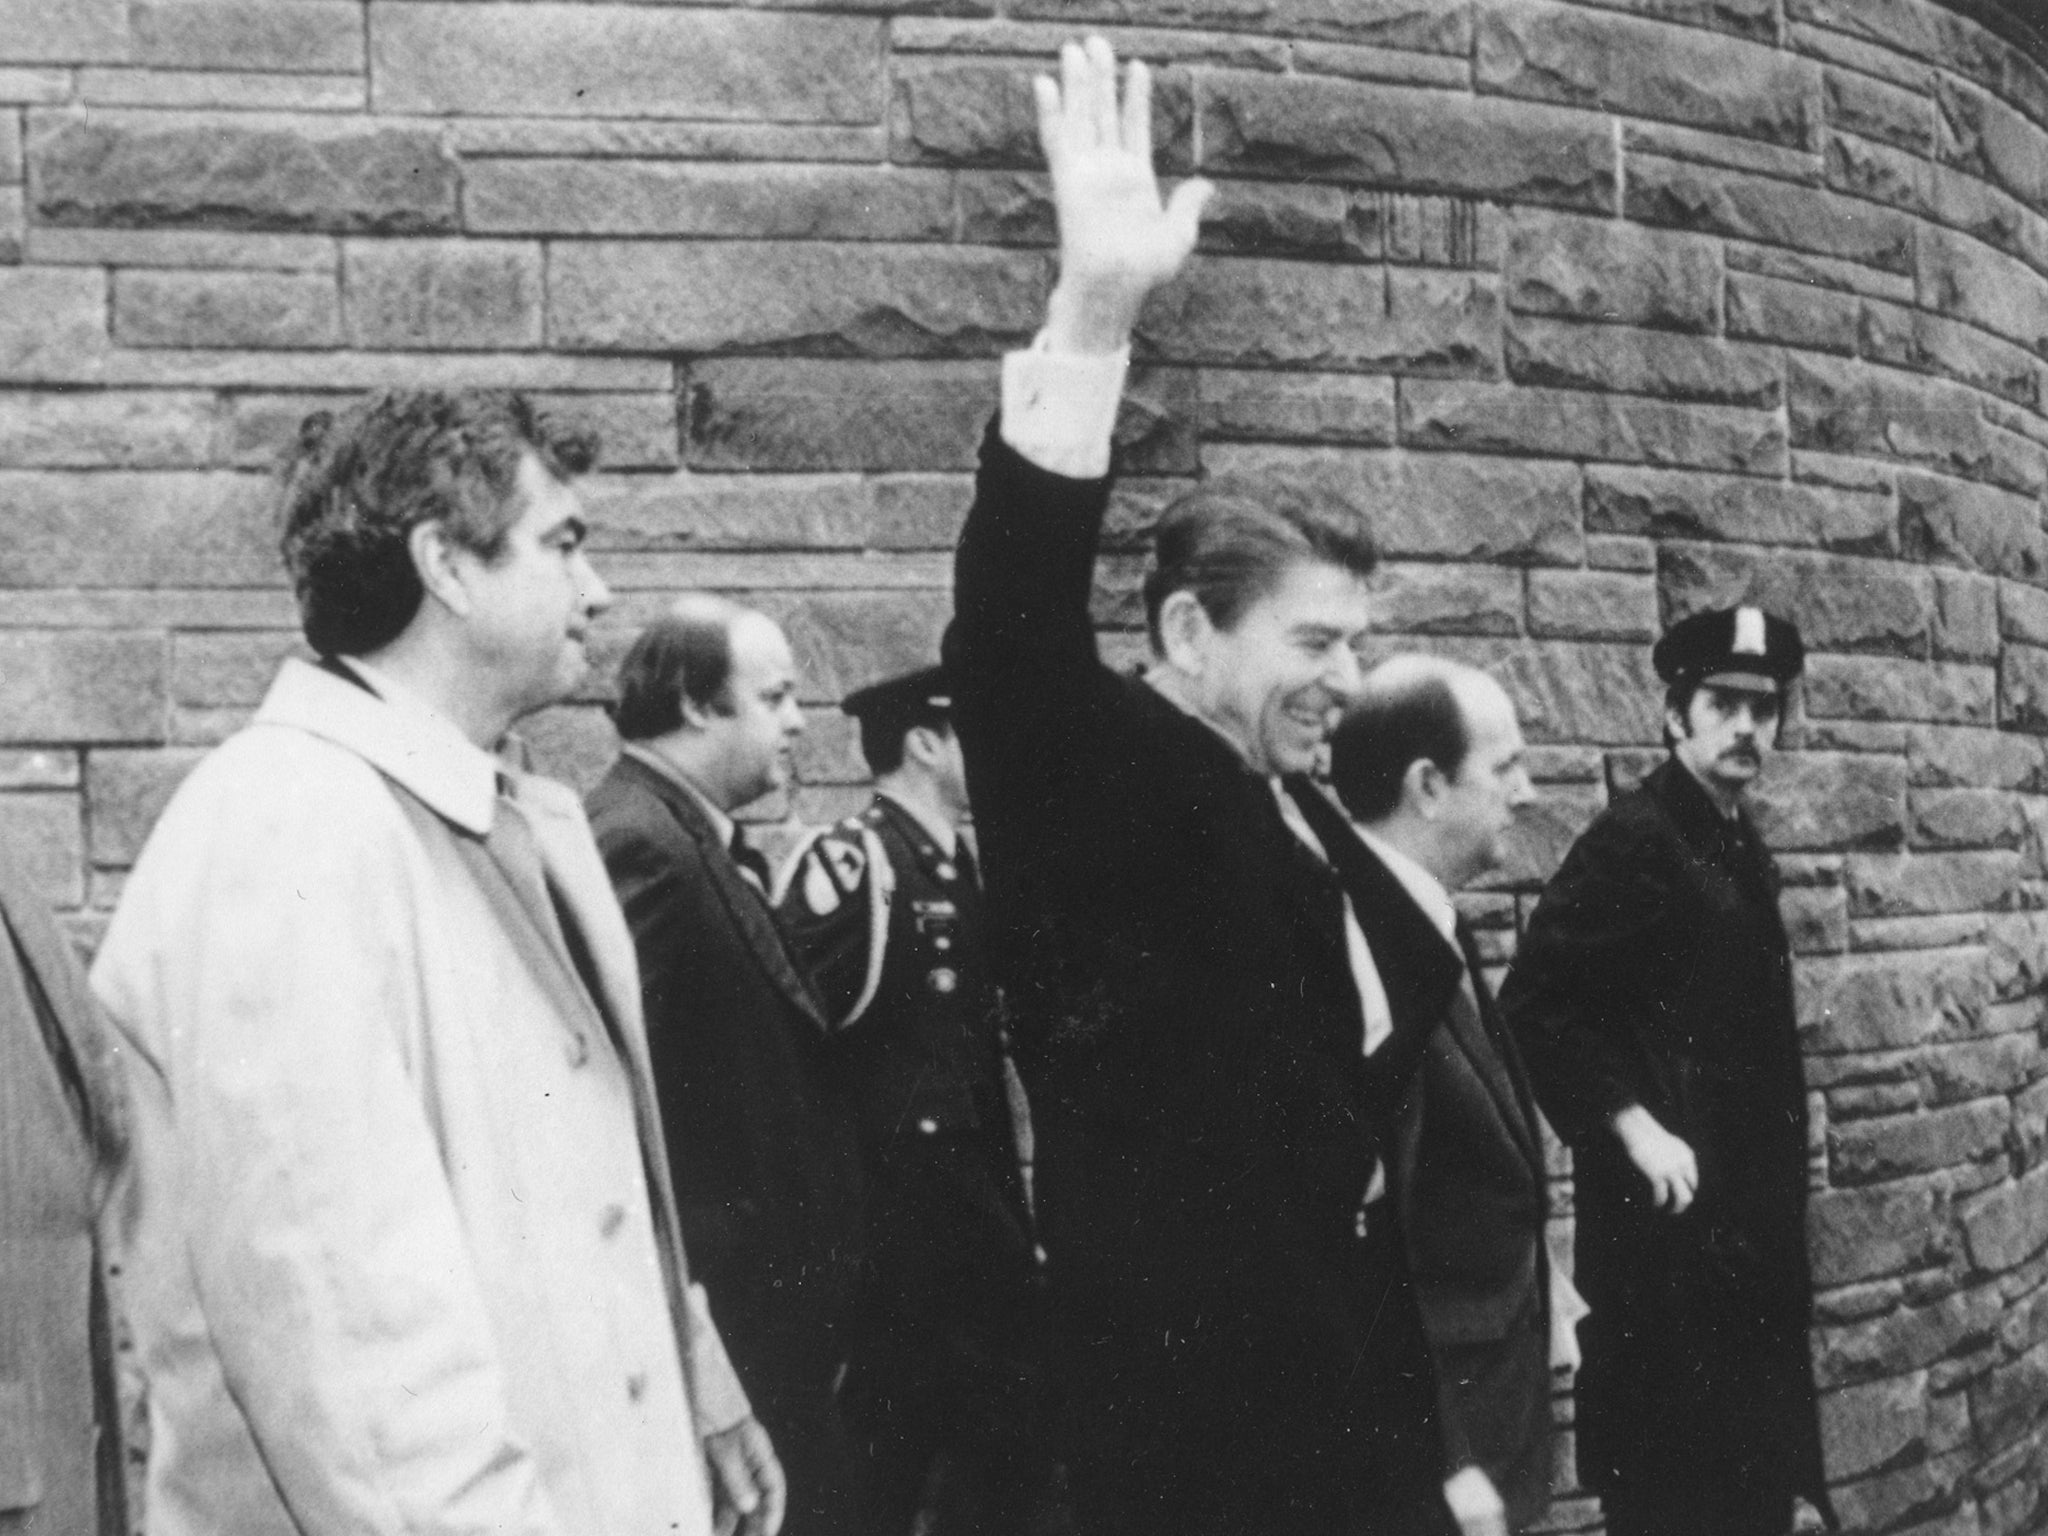 Parr, left, with President Reagan outside the Washington Hilton Hotel in 1981 moments before a gunman opened fire